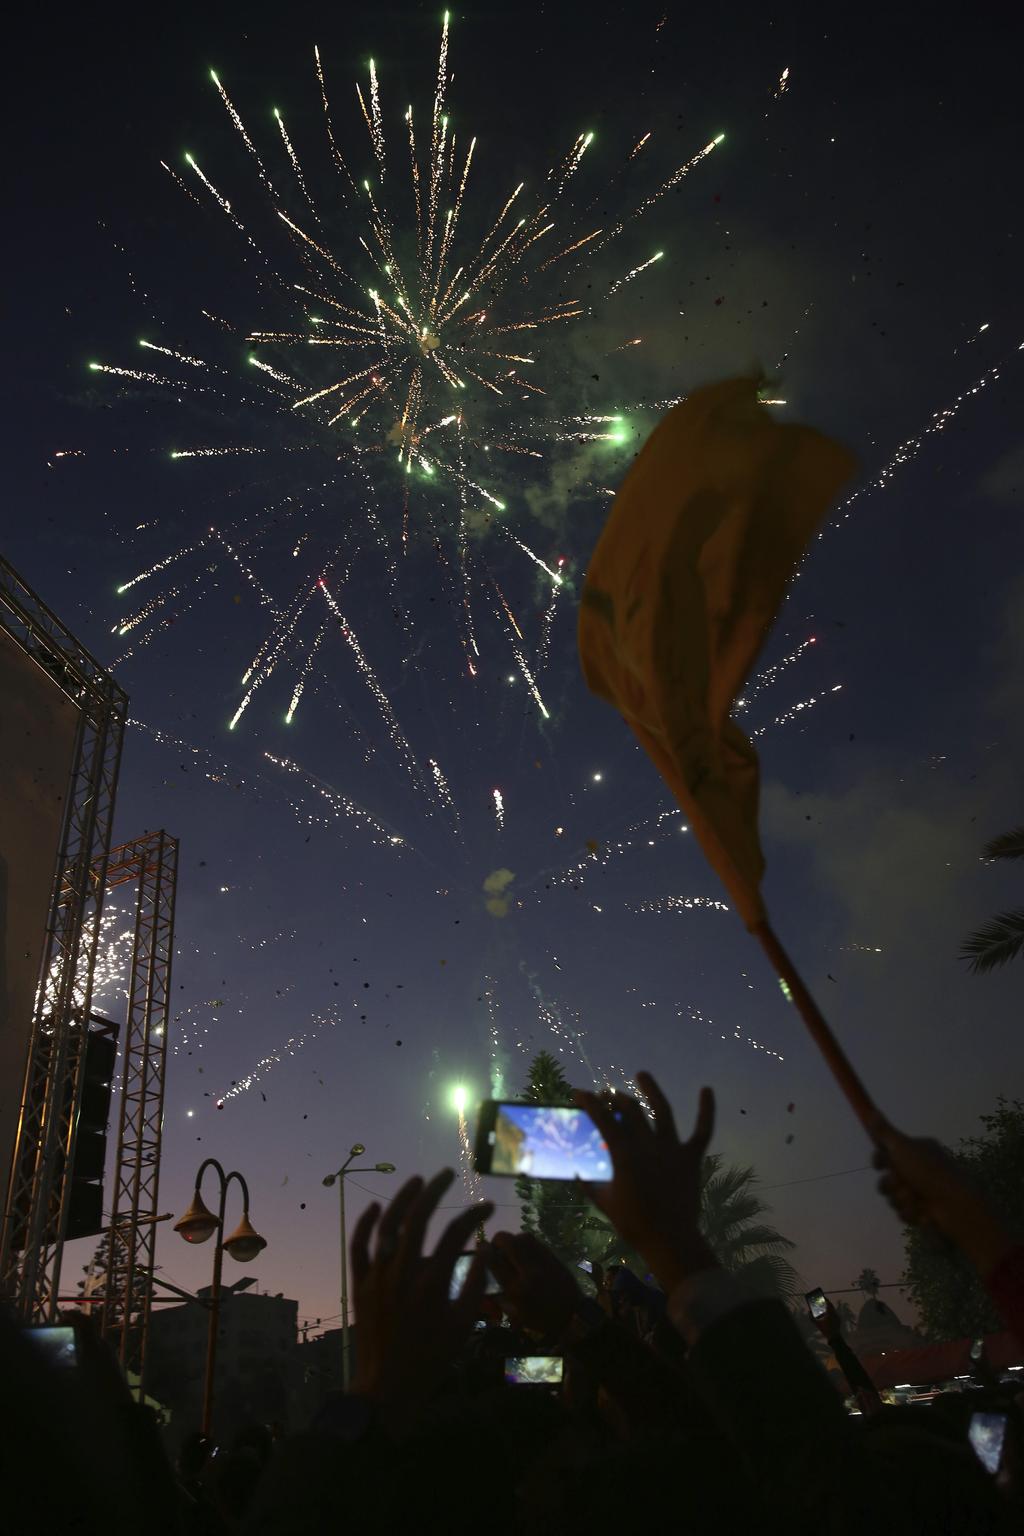 Palestinians take photos of fireworks during a celebration marking the 55th anniversary of the Fatah movement in Gaza City, Dec. 31, 2019